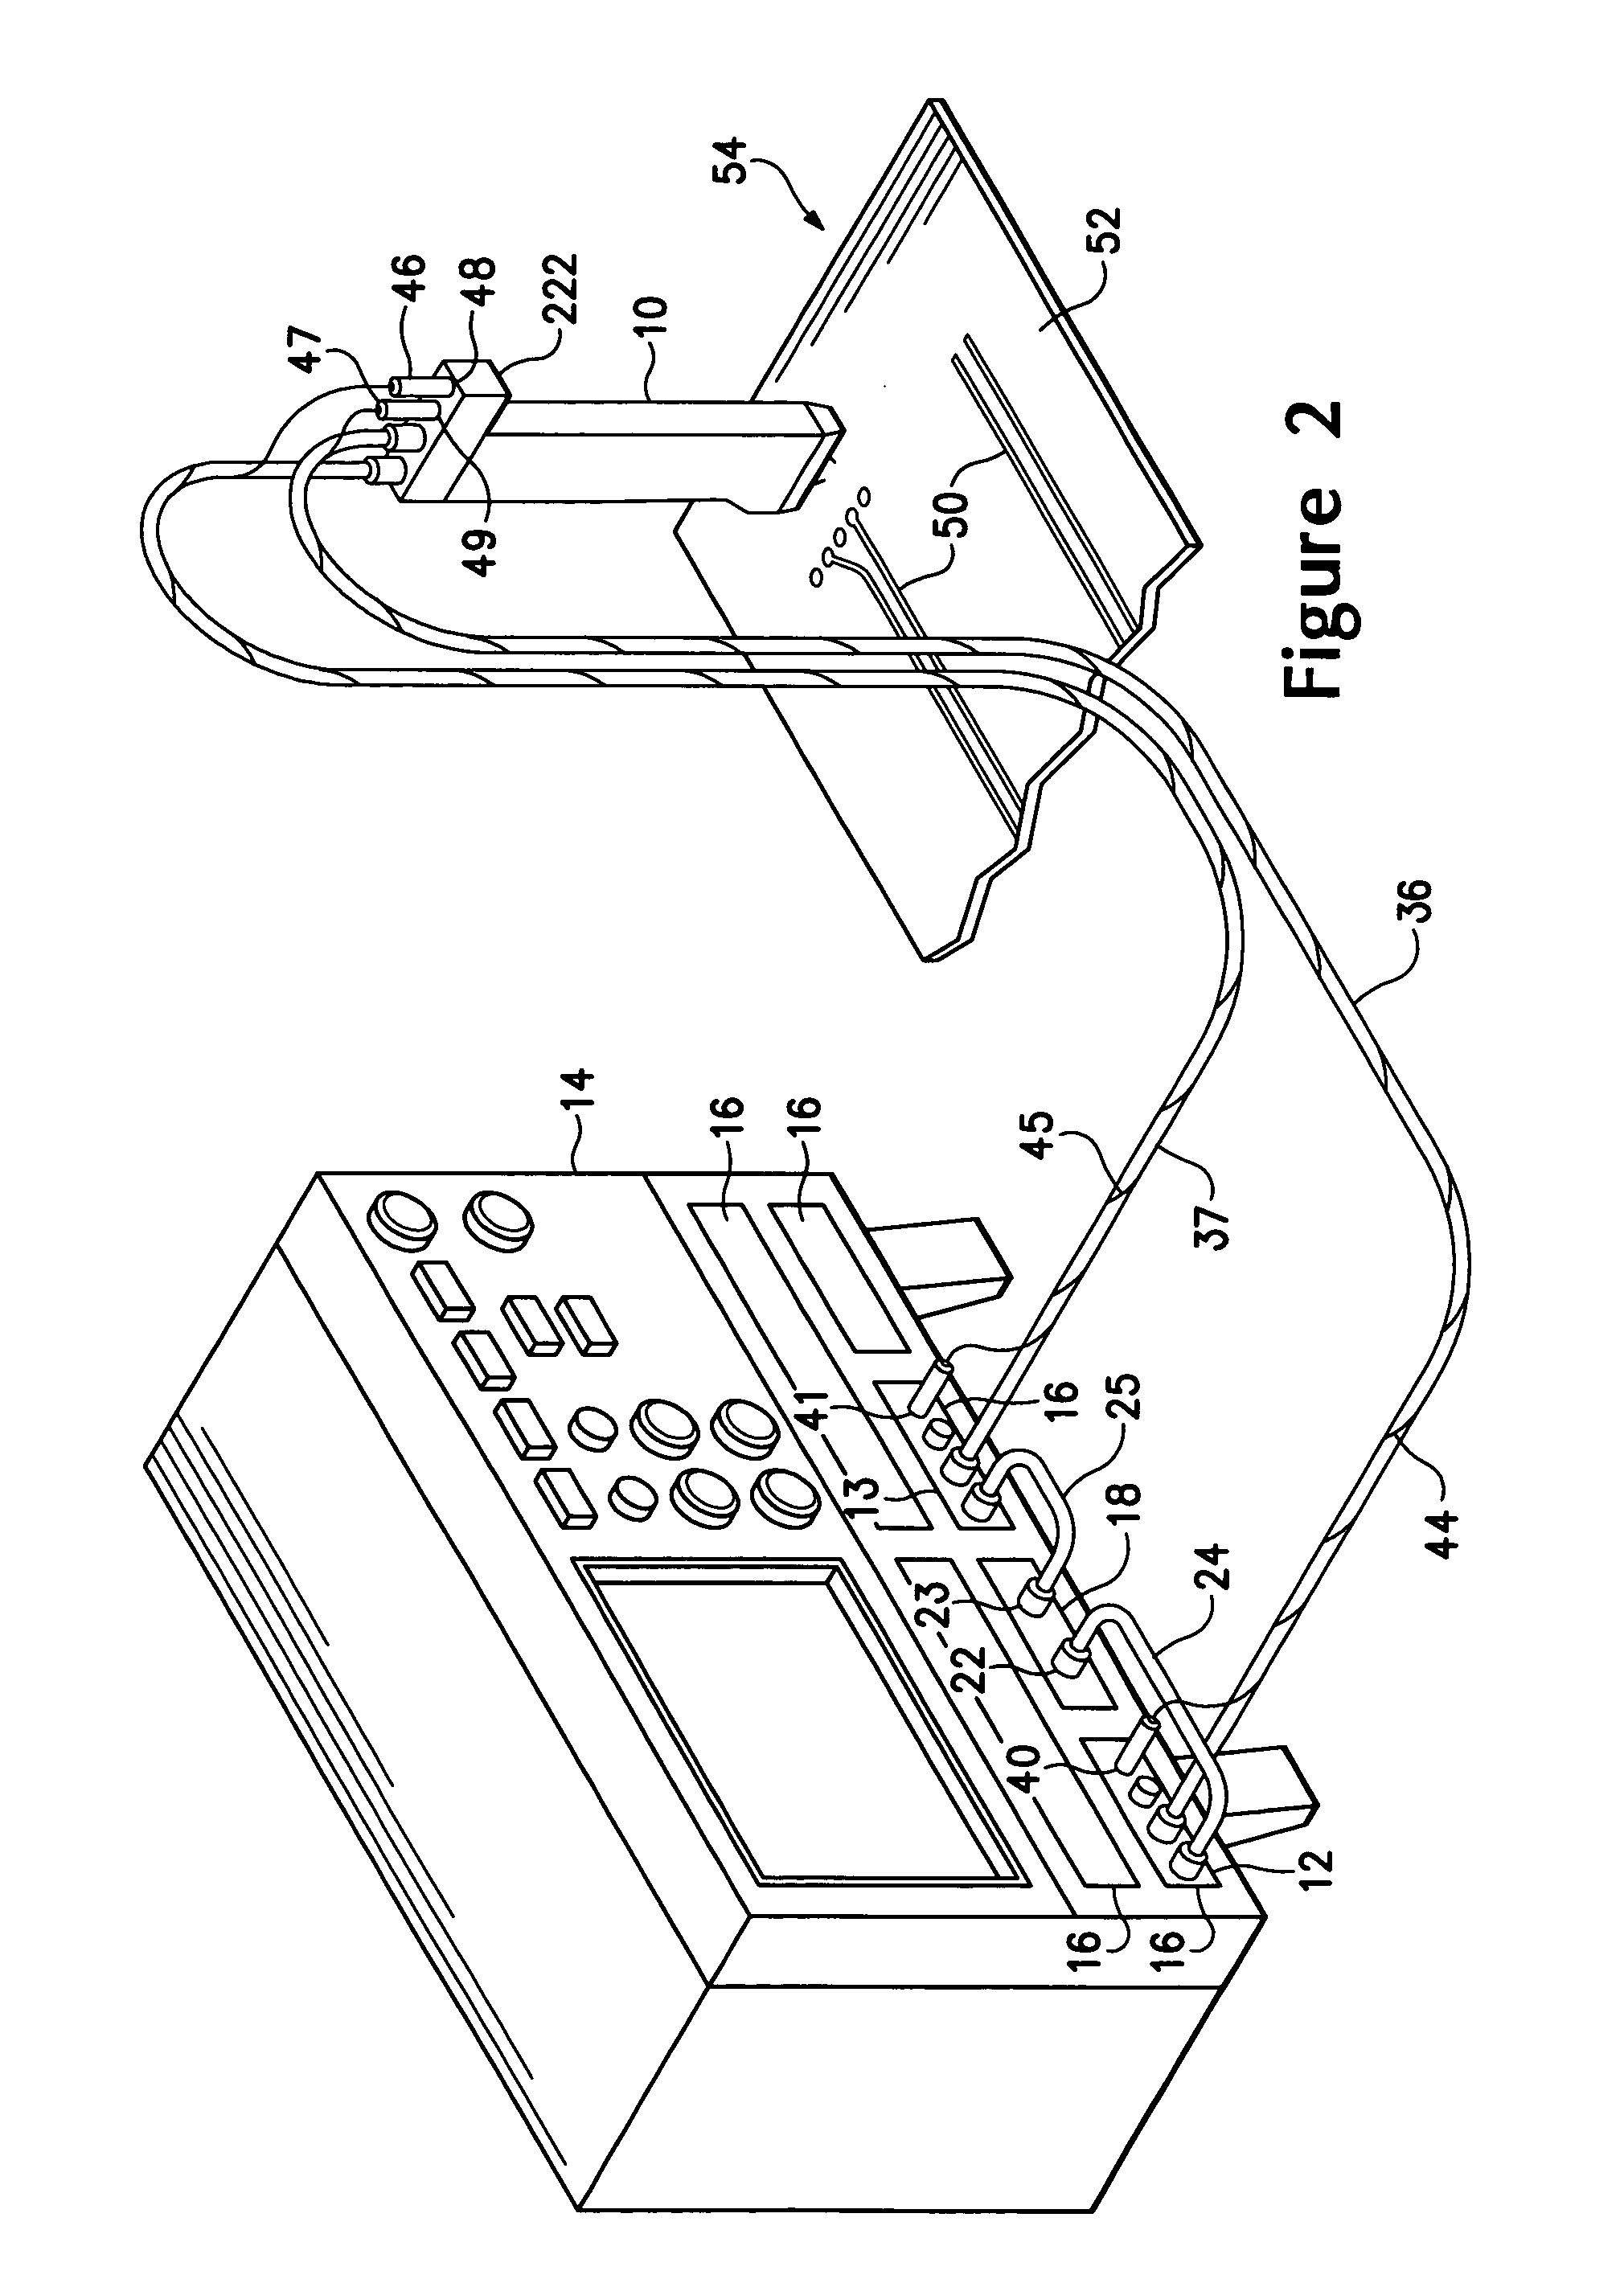 Differential measurement probe having retractable double cushioned variable spacing probing tips with EOS/ESD protection capabilities